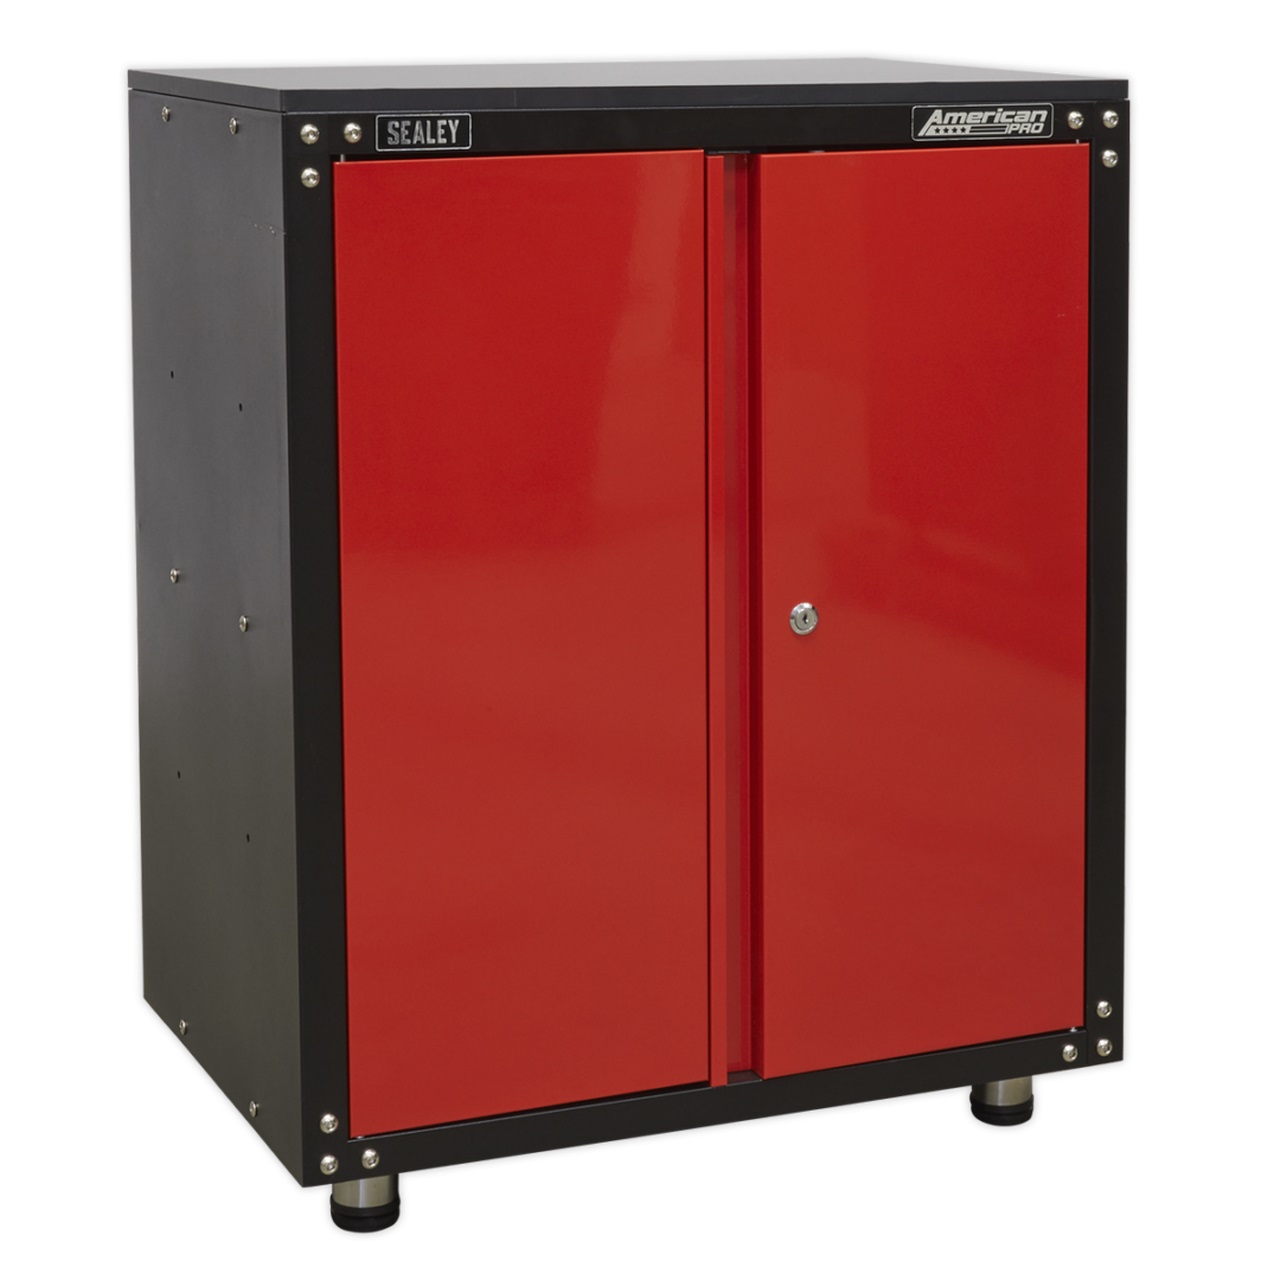 Sealey American Pro Modular Tool Storage System APMS80COMBO3 | Ball bearing drawer slides throughout. | toolforce.ie